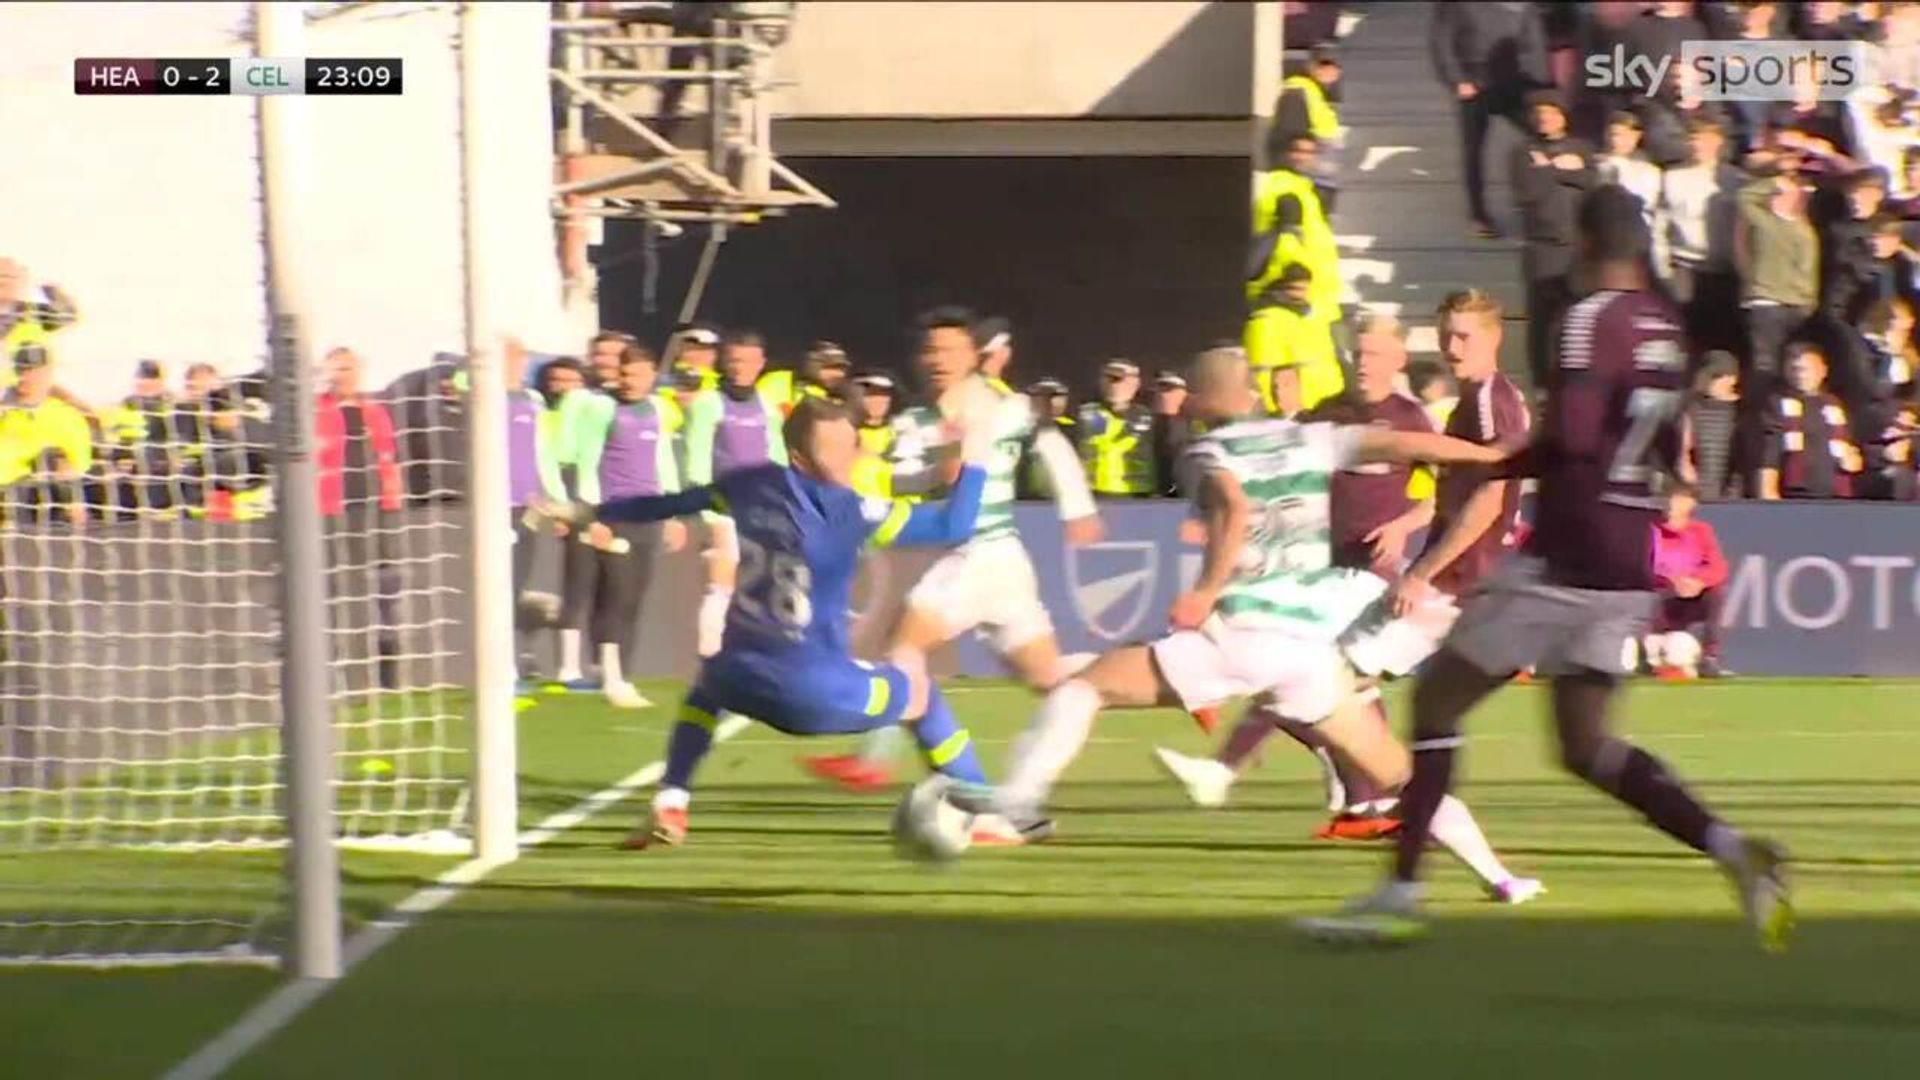 Maeda adds a second for Celtic from close range